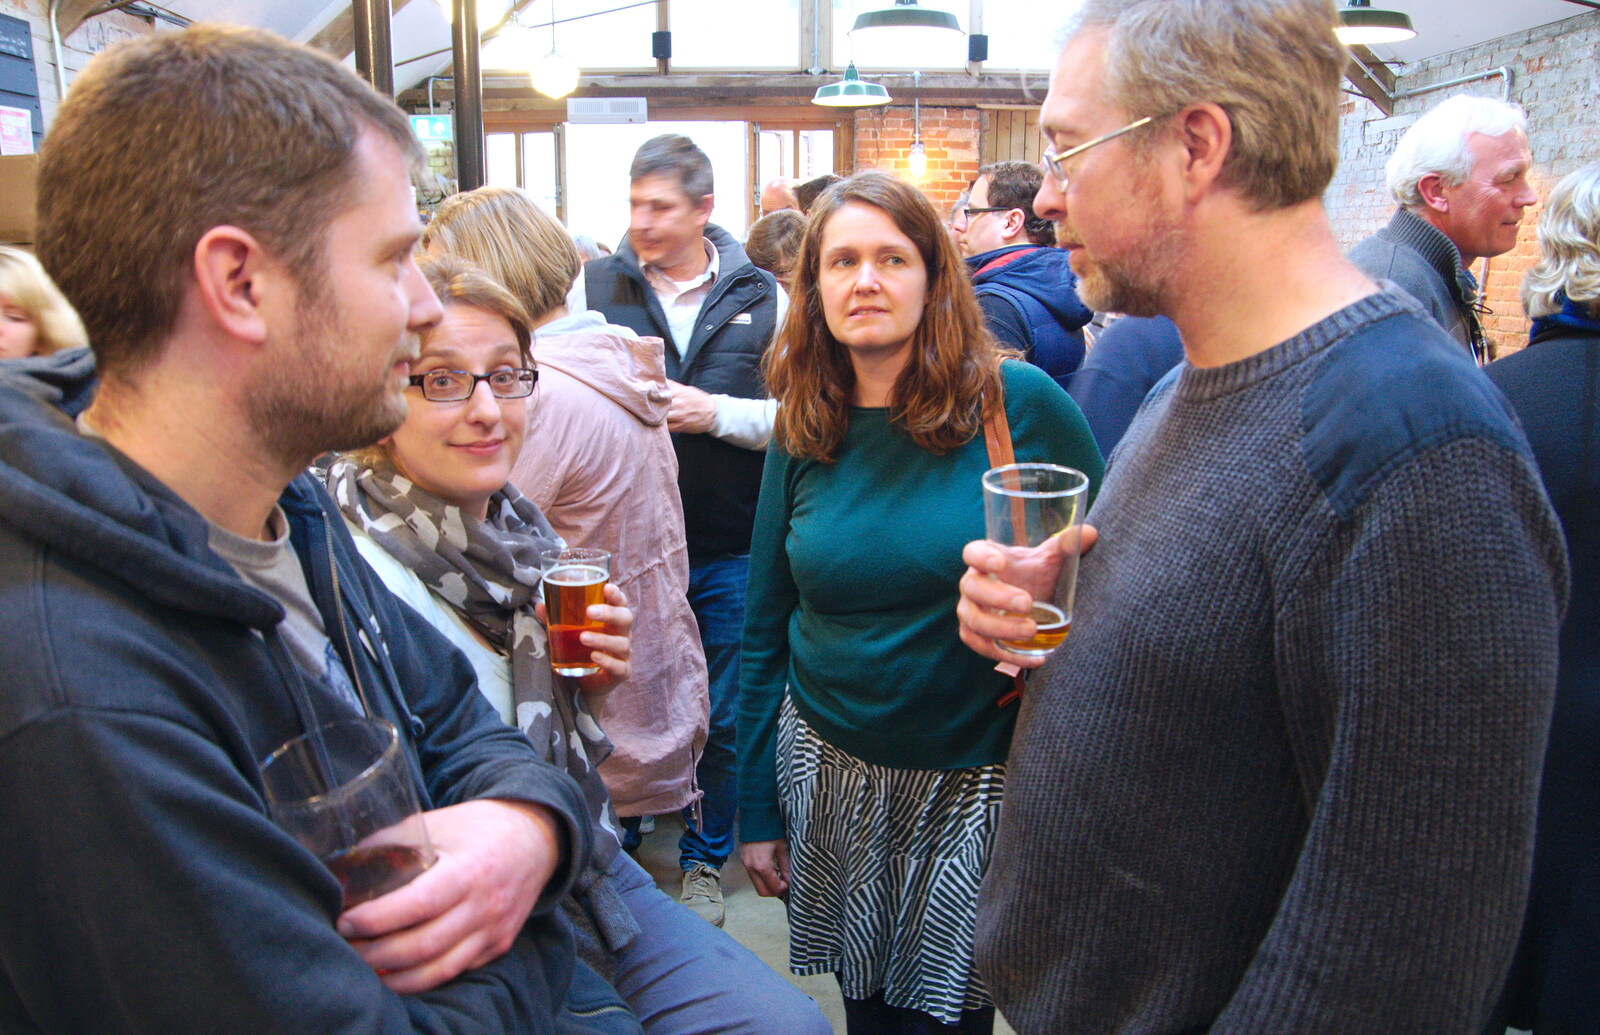 The boy Phil, Suey, Isobel and Marc from The Opening of Star Wing Brewery's Tap Room, Redgrave, Suffolk - 4th May 2019